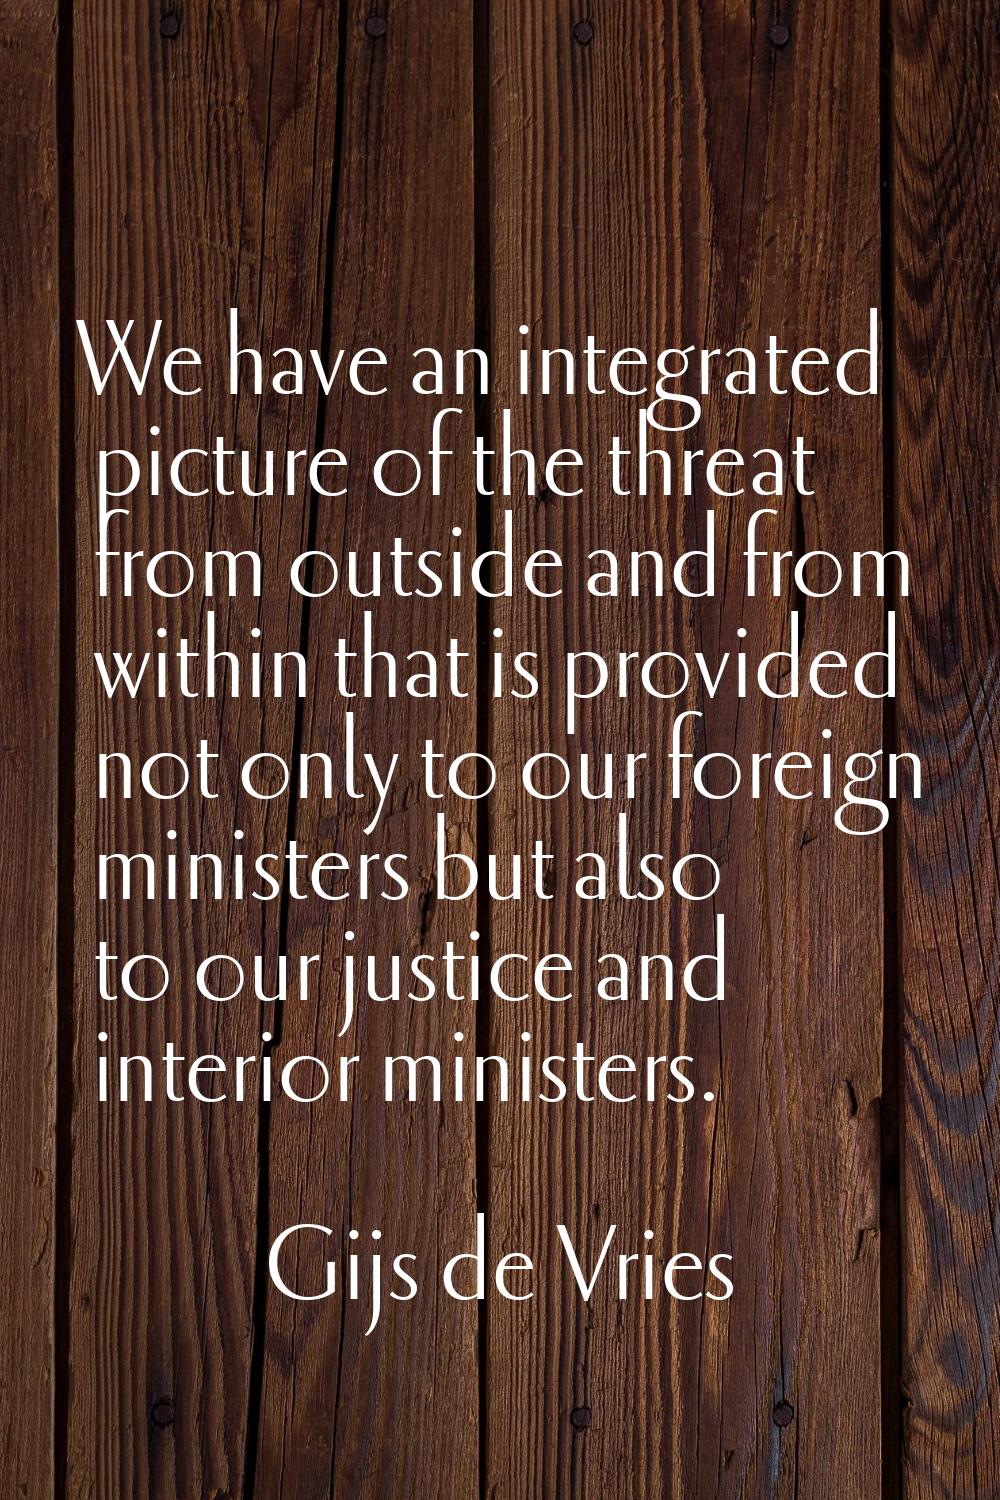 We have an integrated picture of the threat from outside and from within that is provided not only 